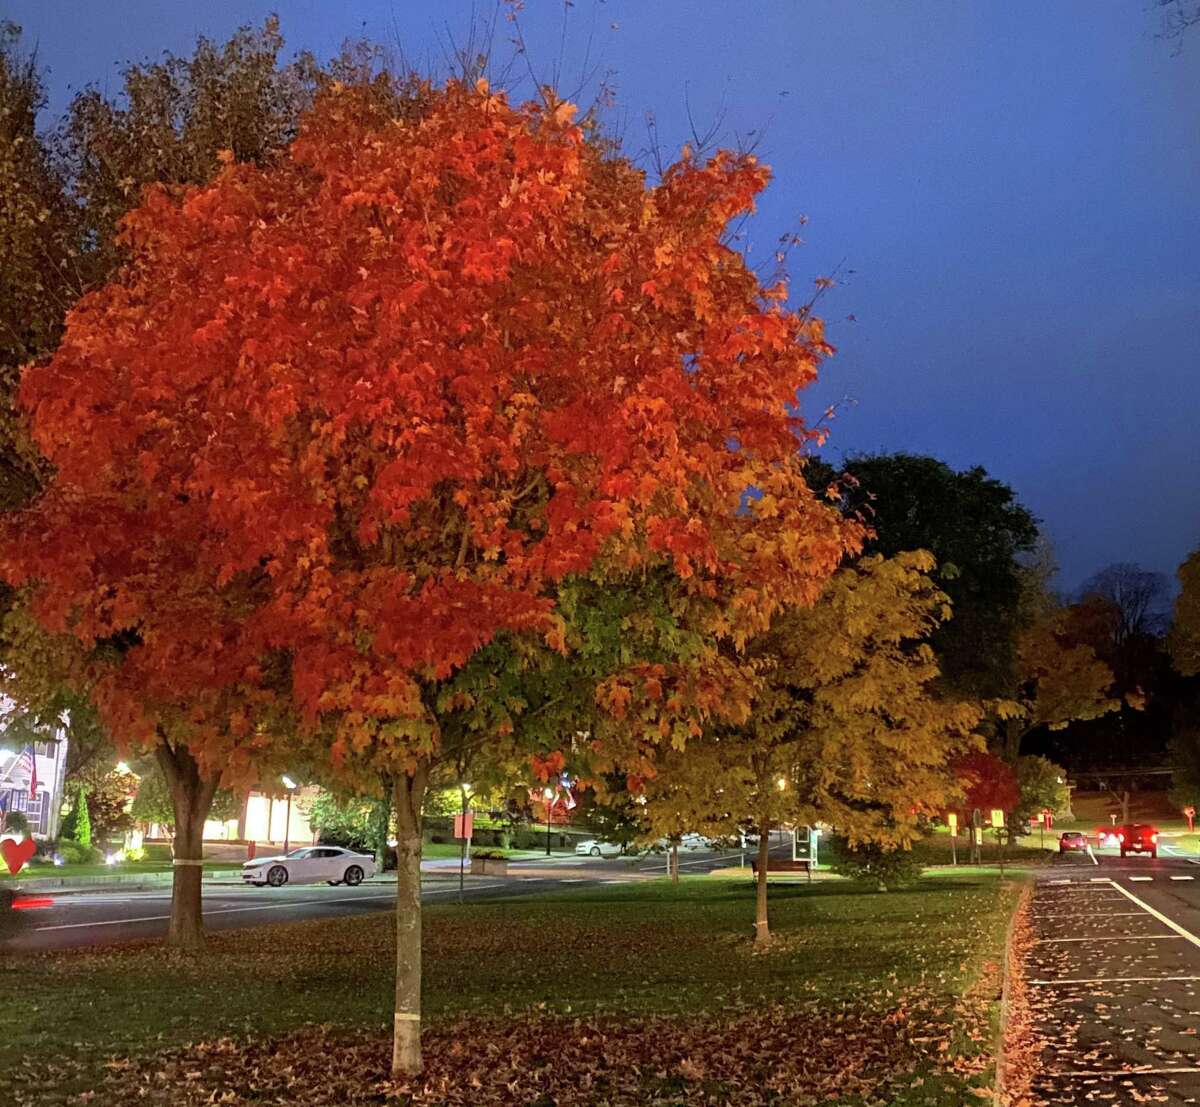 Spectrum/The autumn foliage throughout the Greater New Milford area is always striking. Above, early evening light and lampposts illuminate the colorful foliage of the trees on the Village Green in New Milford. October 2020